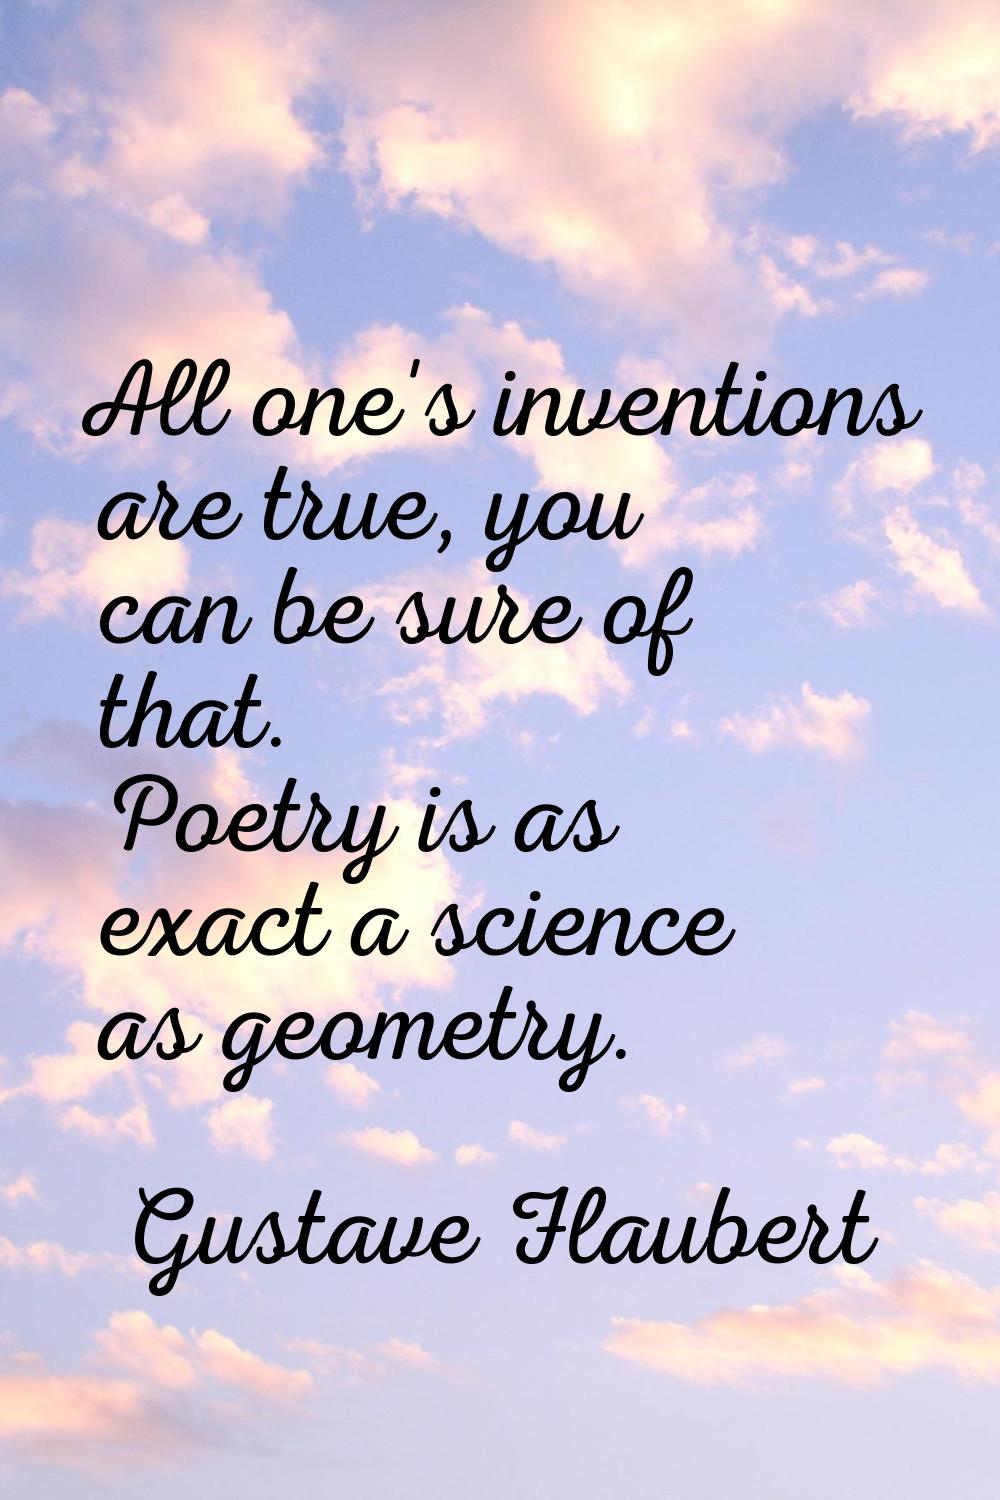 All one's inventions are true, you can be sure of that. Poetry is as exact a science as geometry.